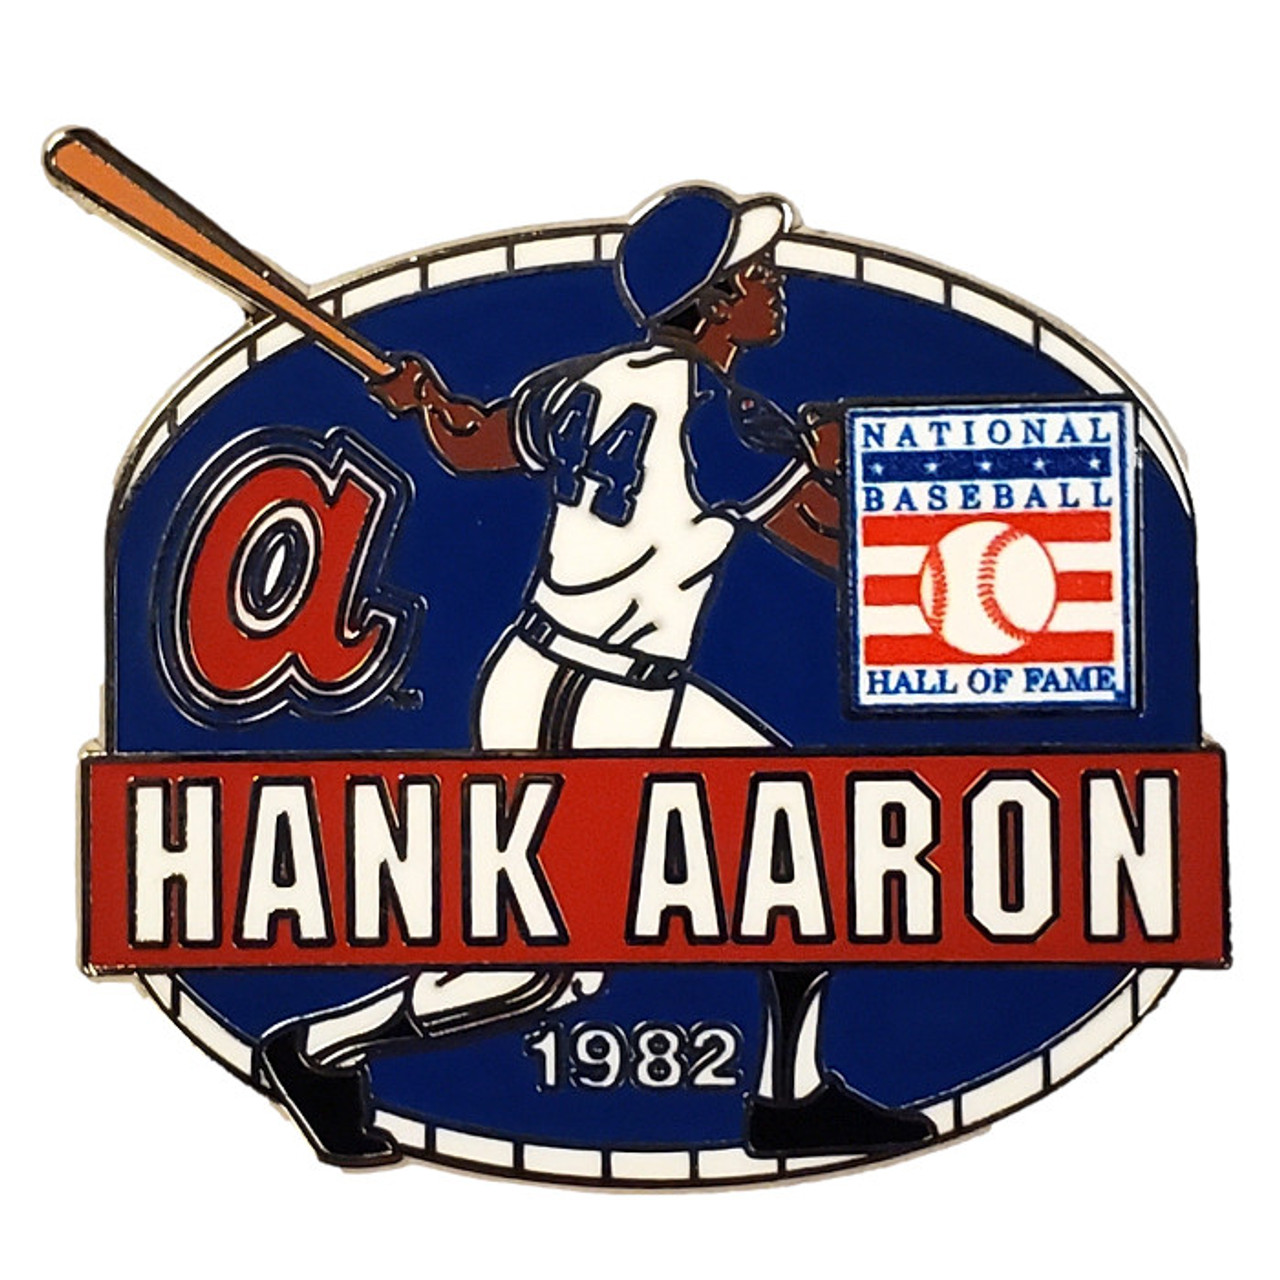 Hank Aaron Atlanta Braves Hall of Fame Class of 1982 Collector’s Pin